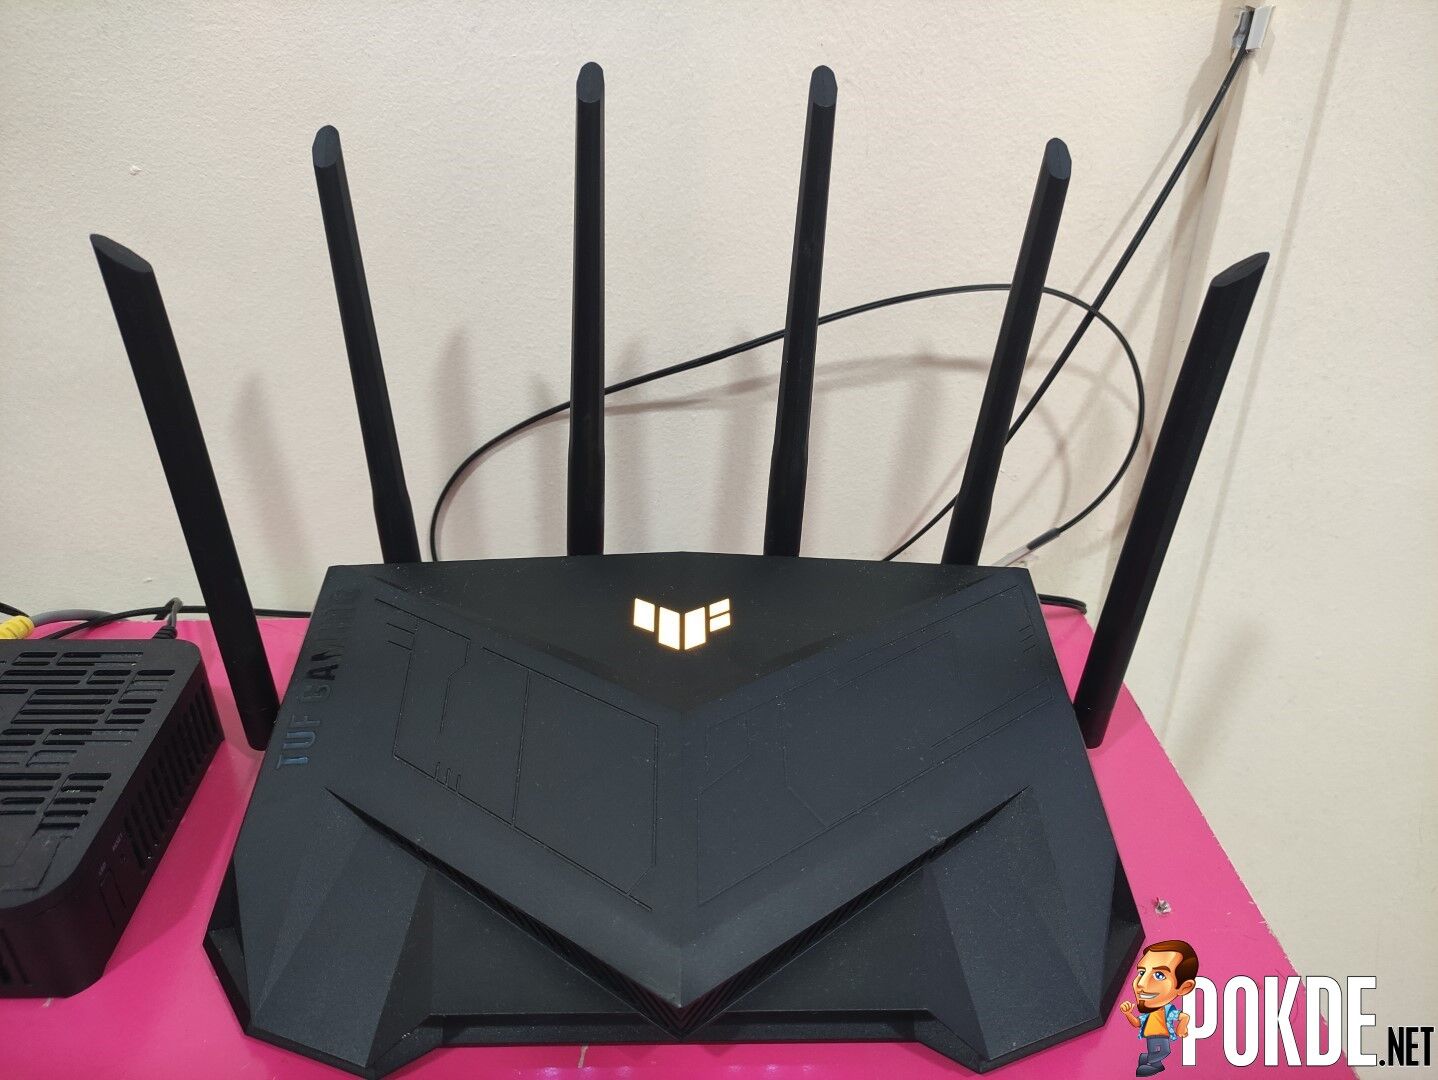 ASUS TUF Gaming AX5400 Router Review - Budget Friendly Router For Your Gaming Needs 34